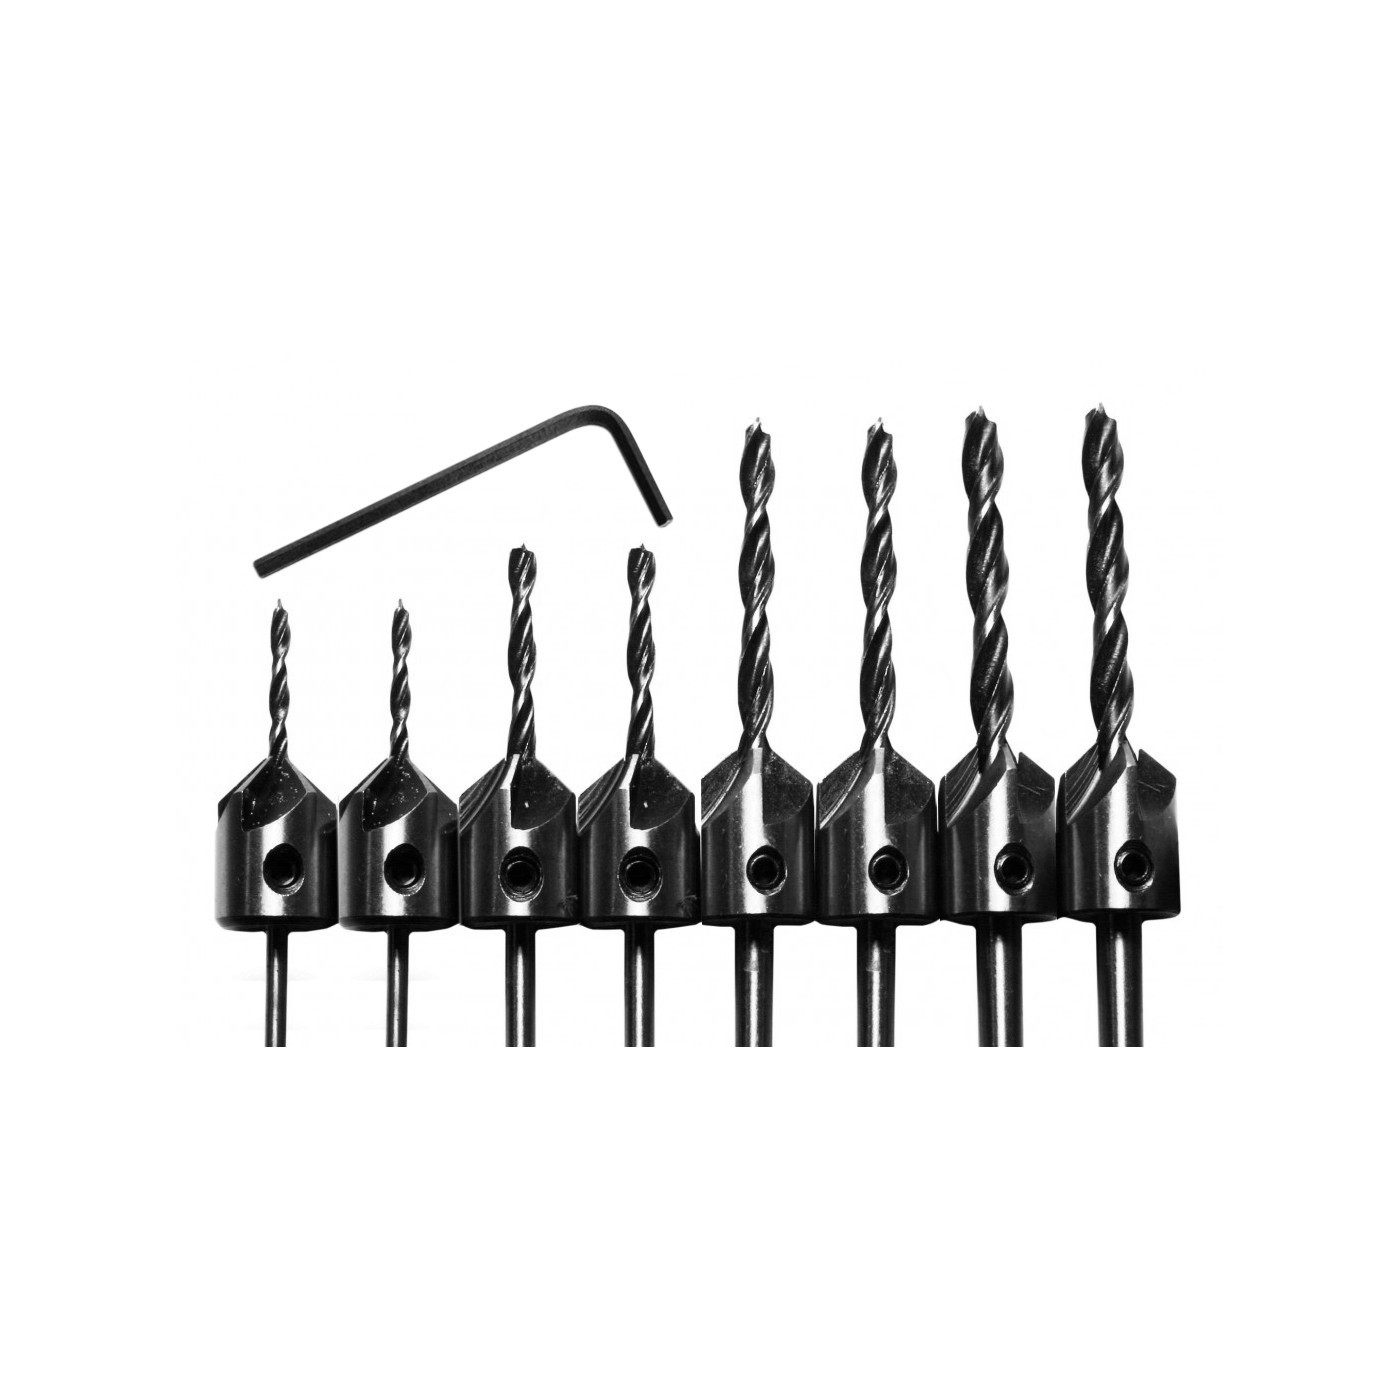 Set of 8 wood drill bits with countersunk part (3-6 mm)